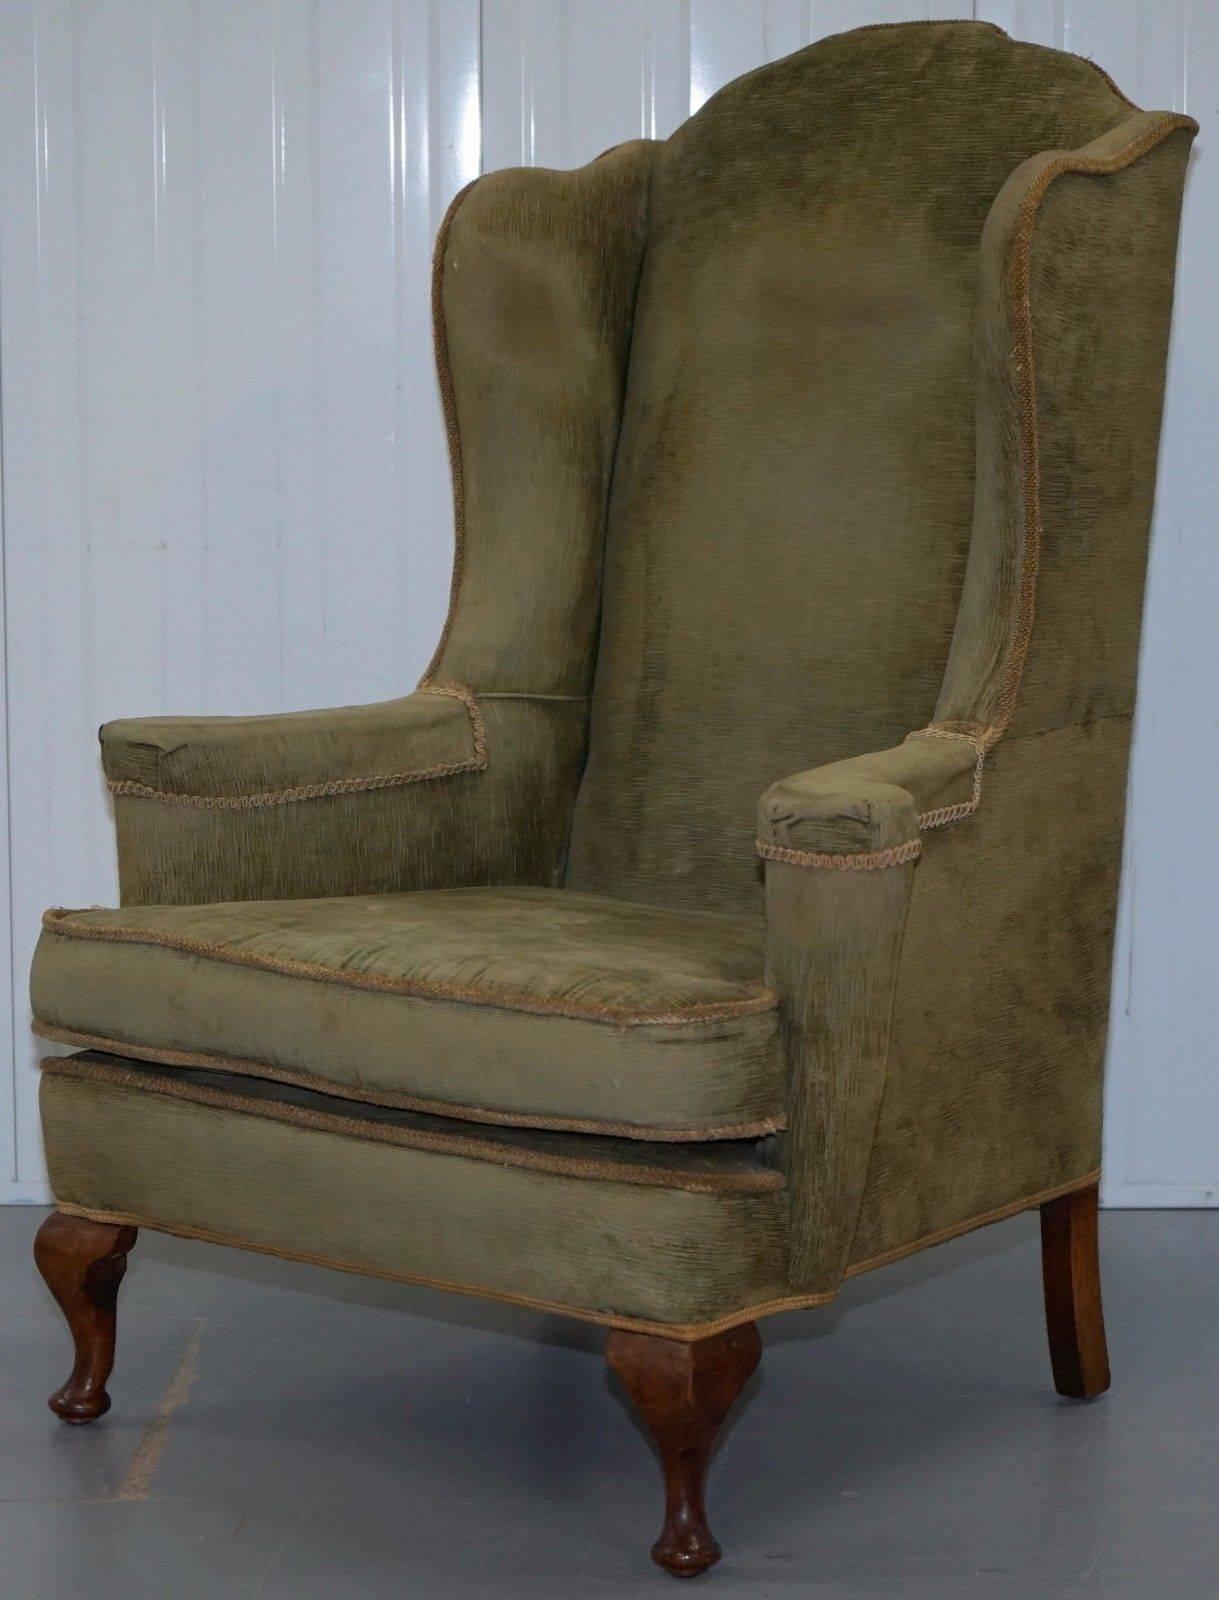 We are delighted to offer for sale this lovely pair of Victorian Wingback armchairs in the George I / William Morris style

A very nice well-proportioned pair of wingback armchairs with styling for the mid-1700s, the frame is all walnut, the arms